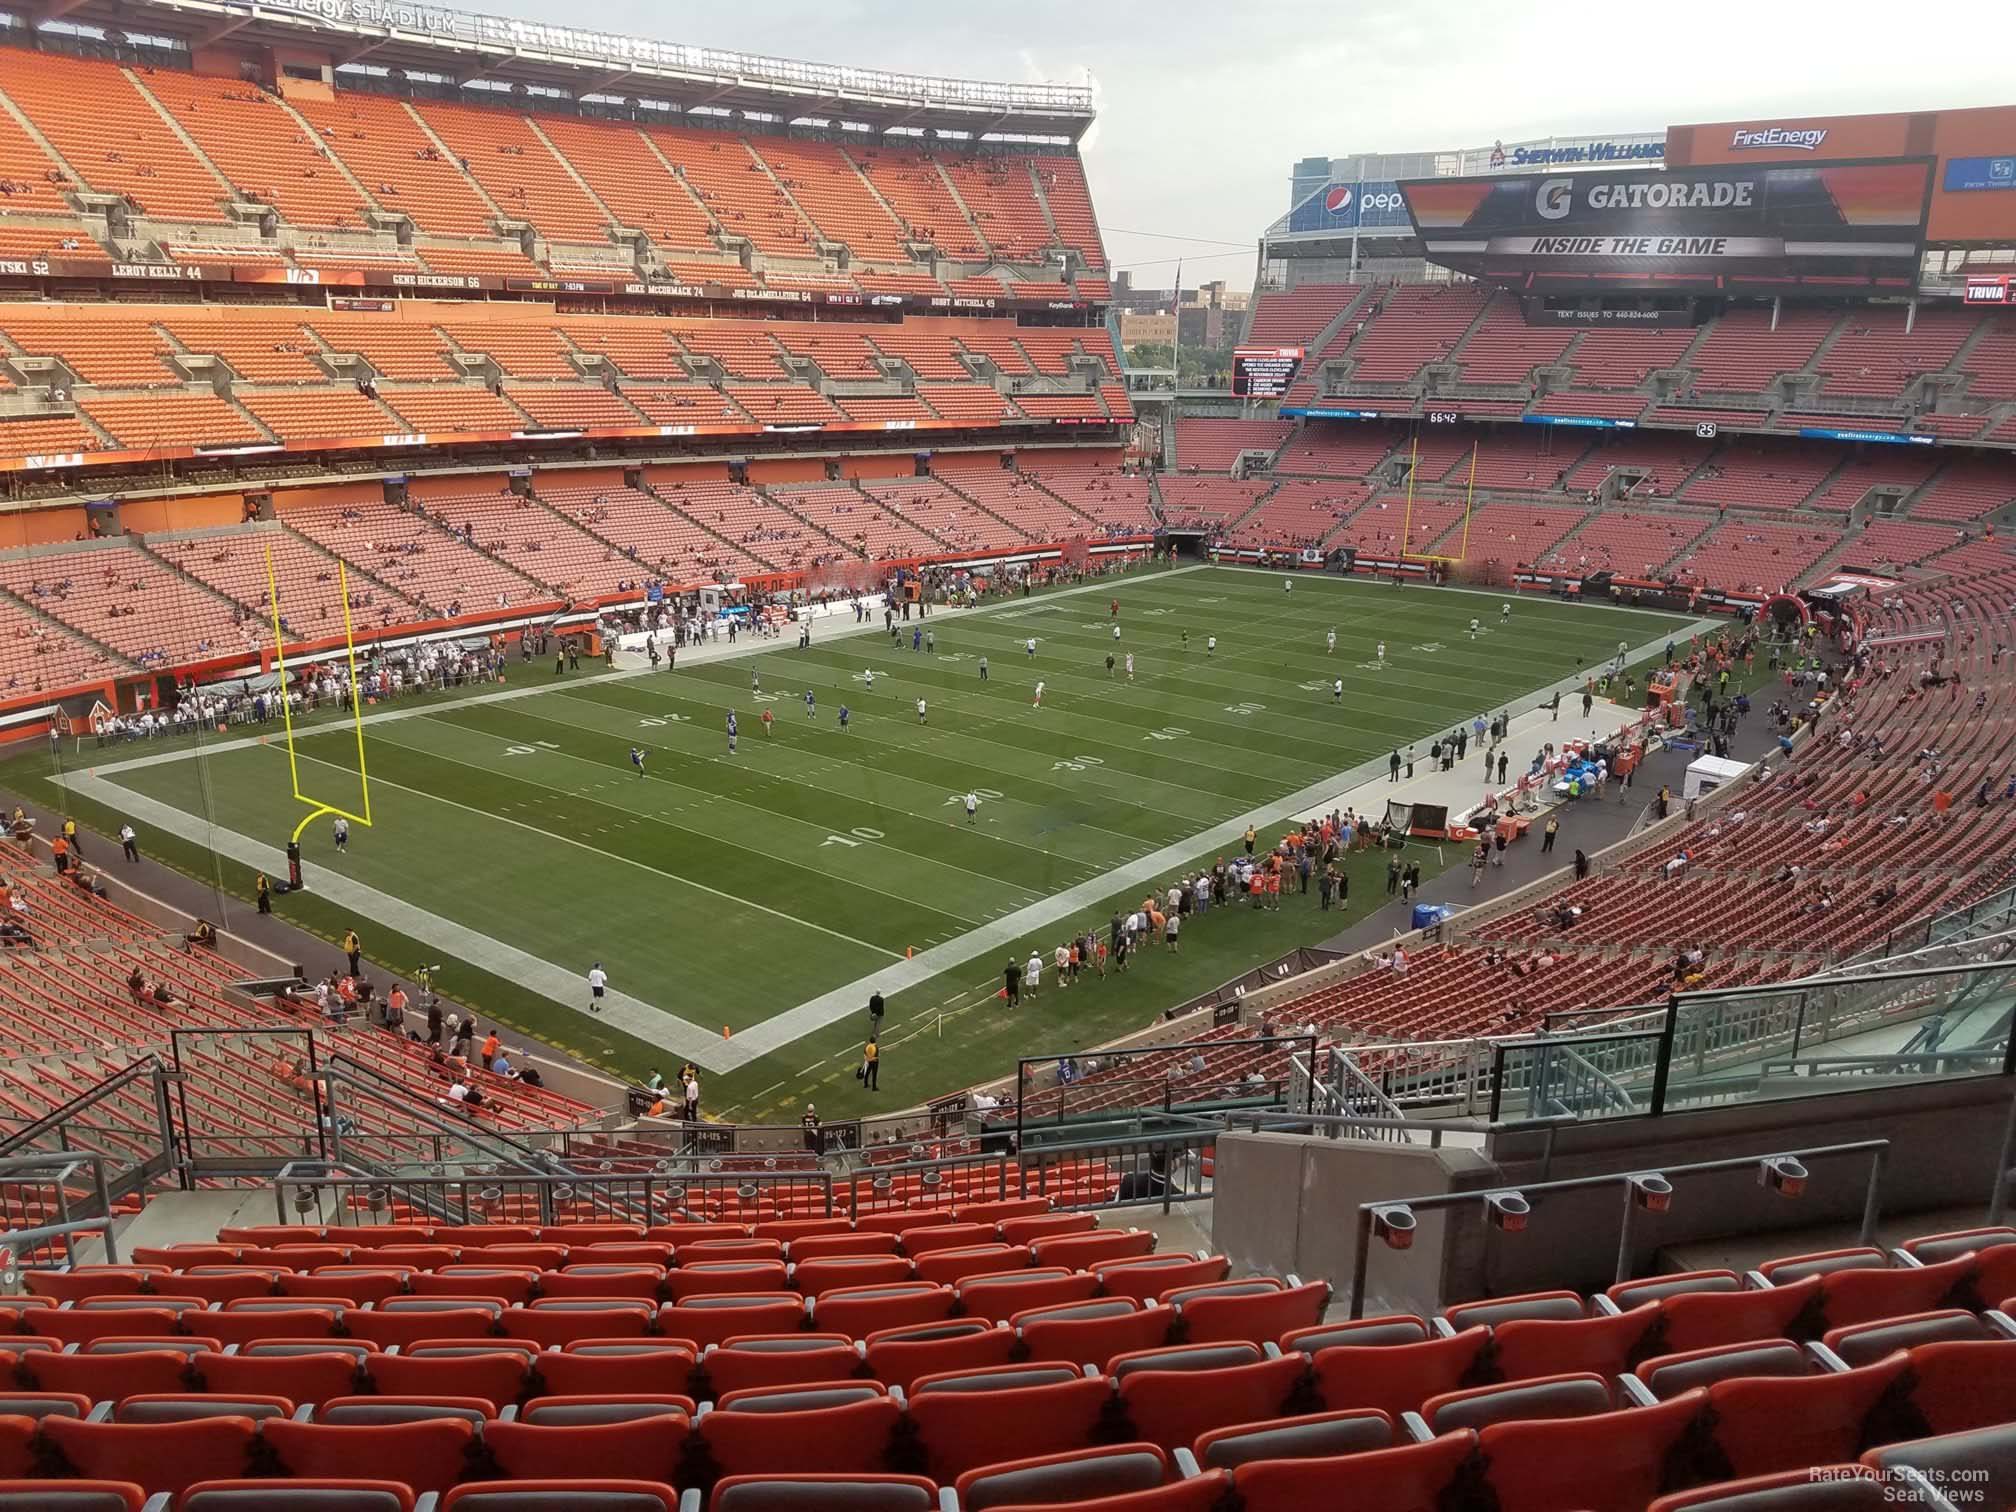 section 326, row 18 seat view  - cleveland browns stadium